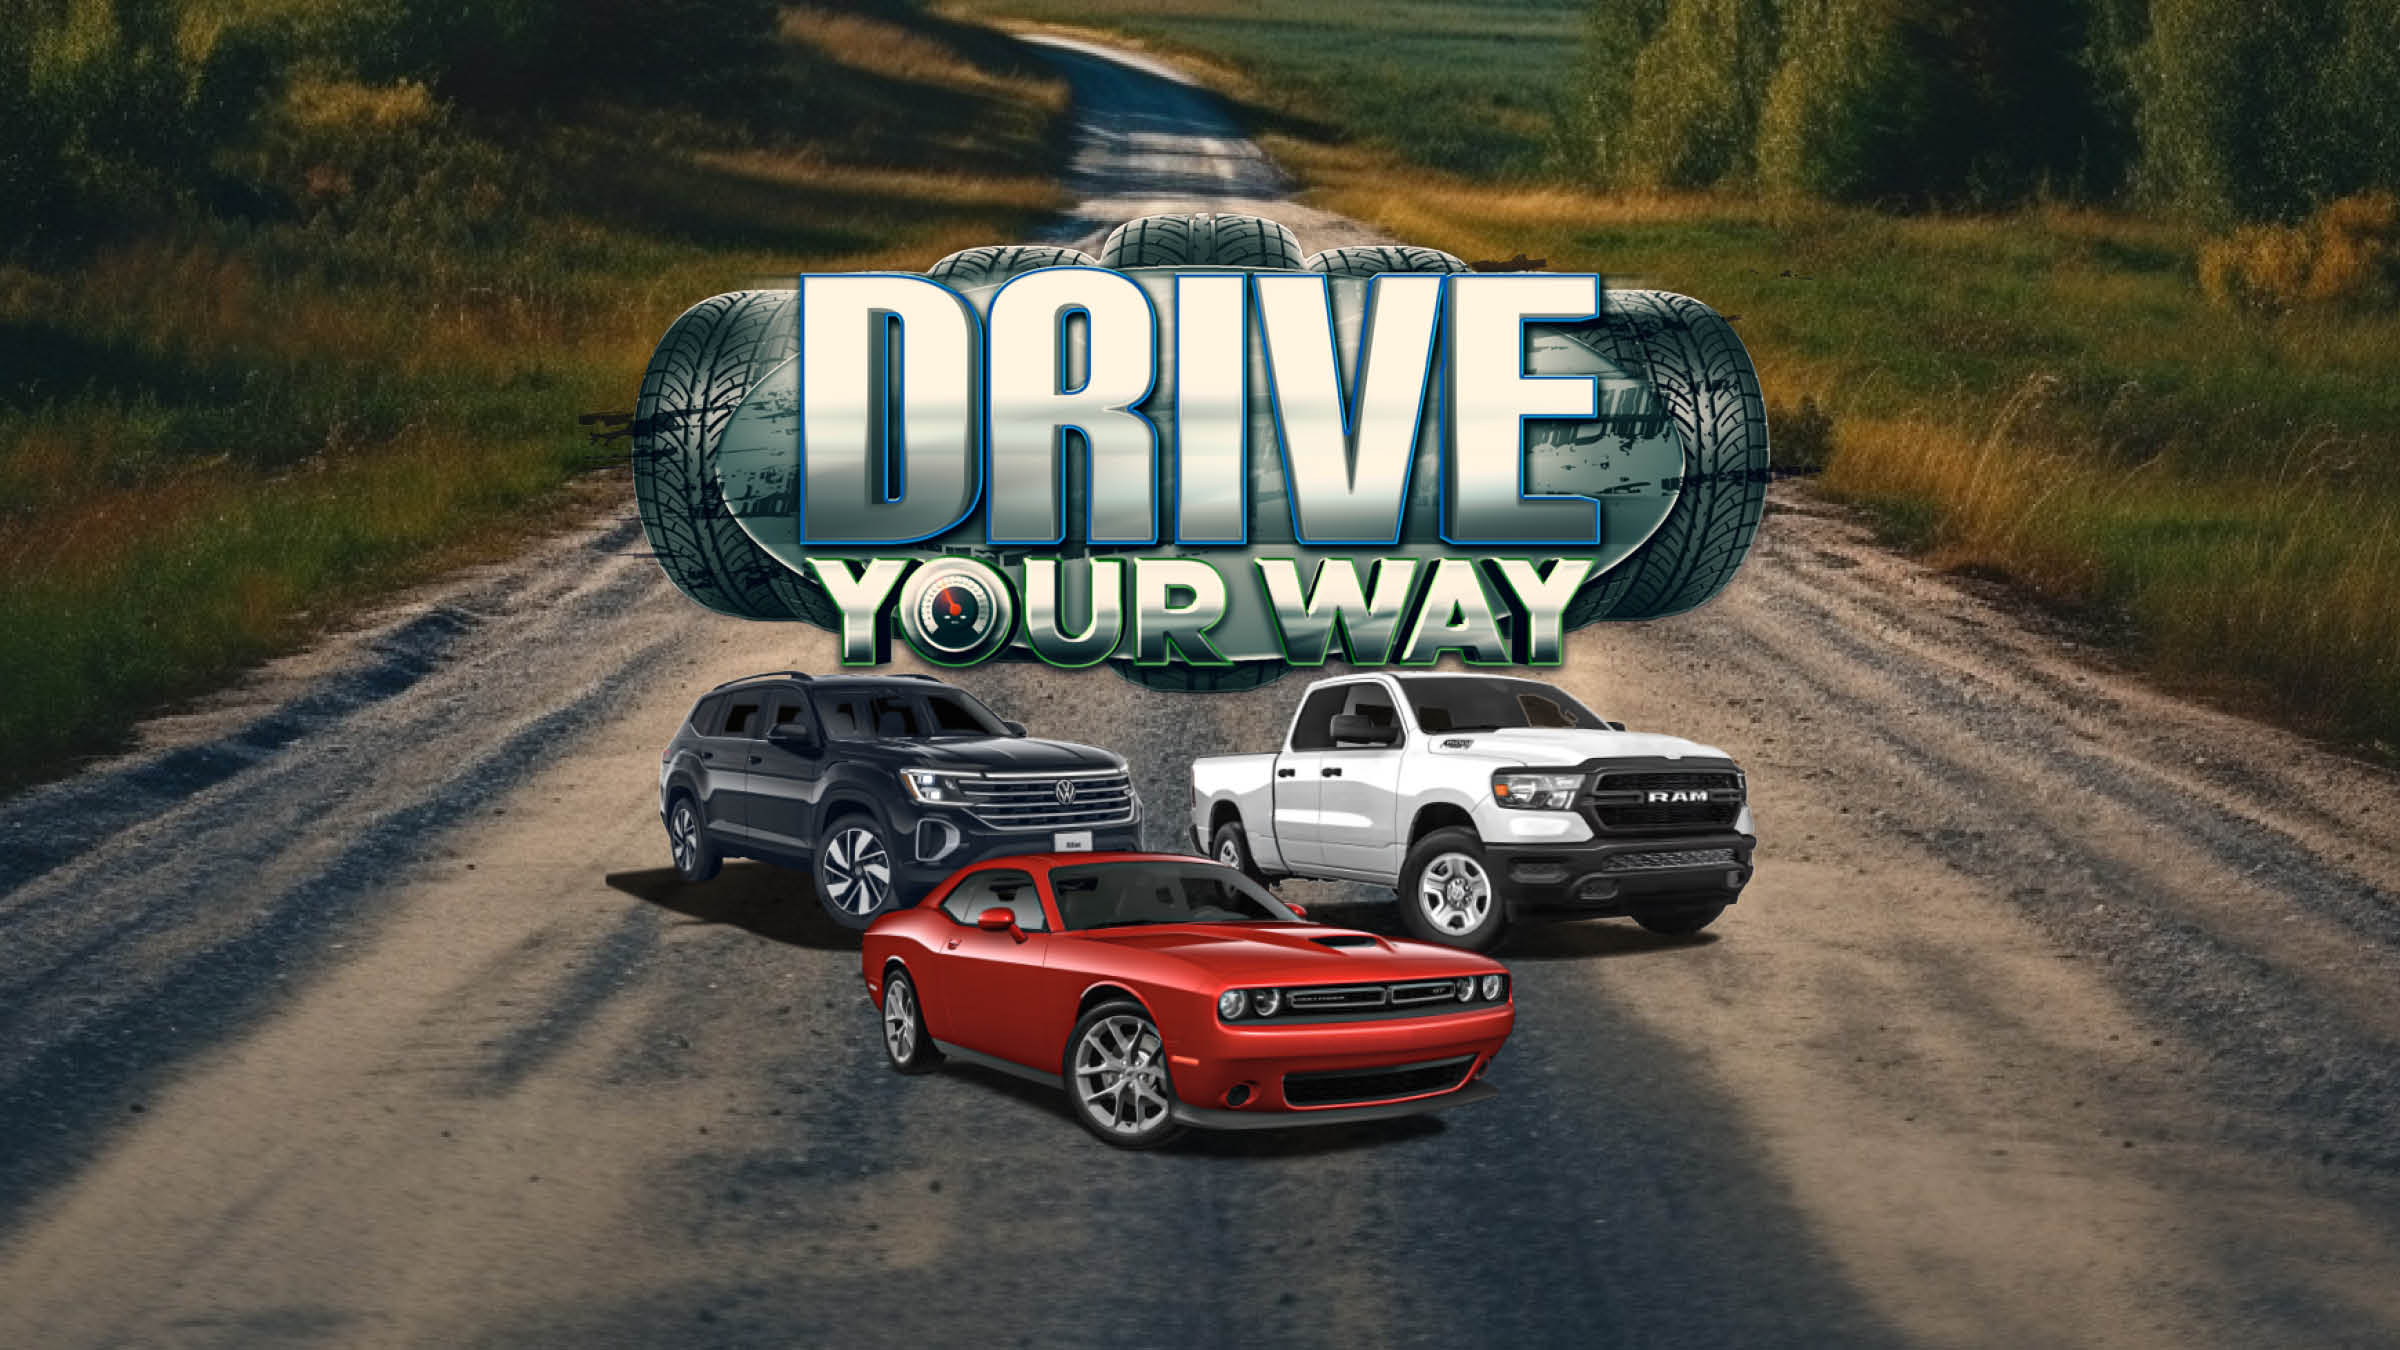 DRIVE YOUR WAY